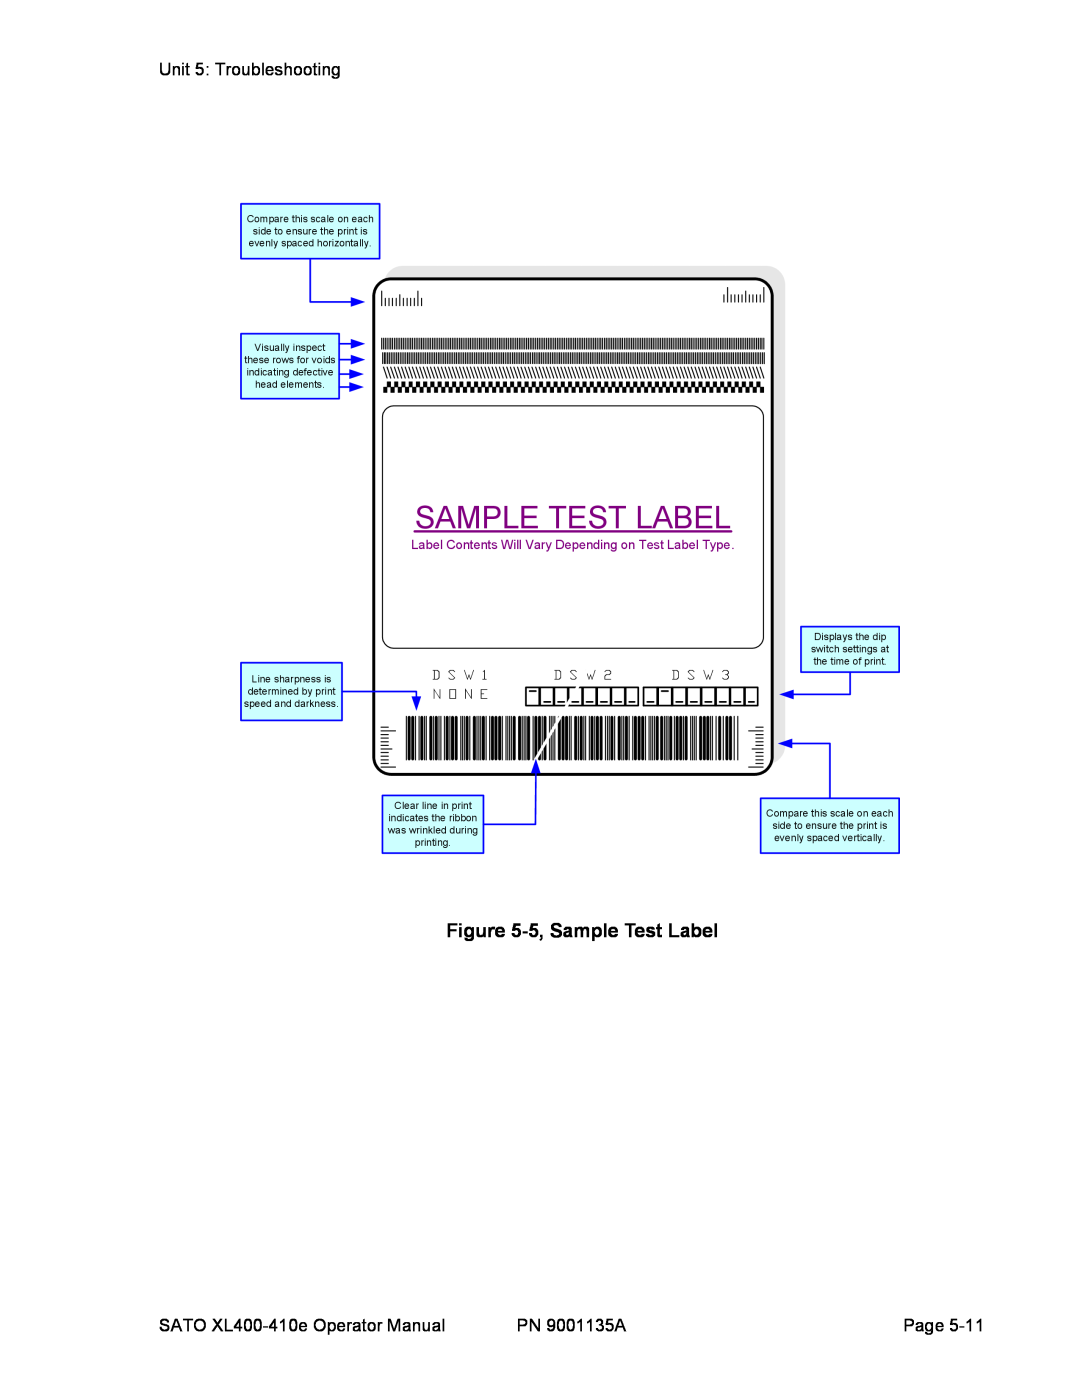 SATO 400e, 410e manual Sample Test Label, Label Contents Will Vary Depending on Test Label Type, D S W, N O N E 